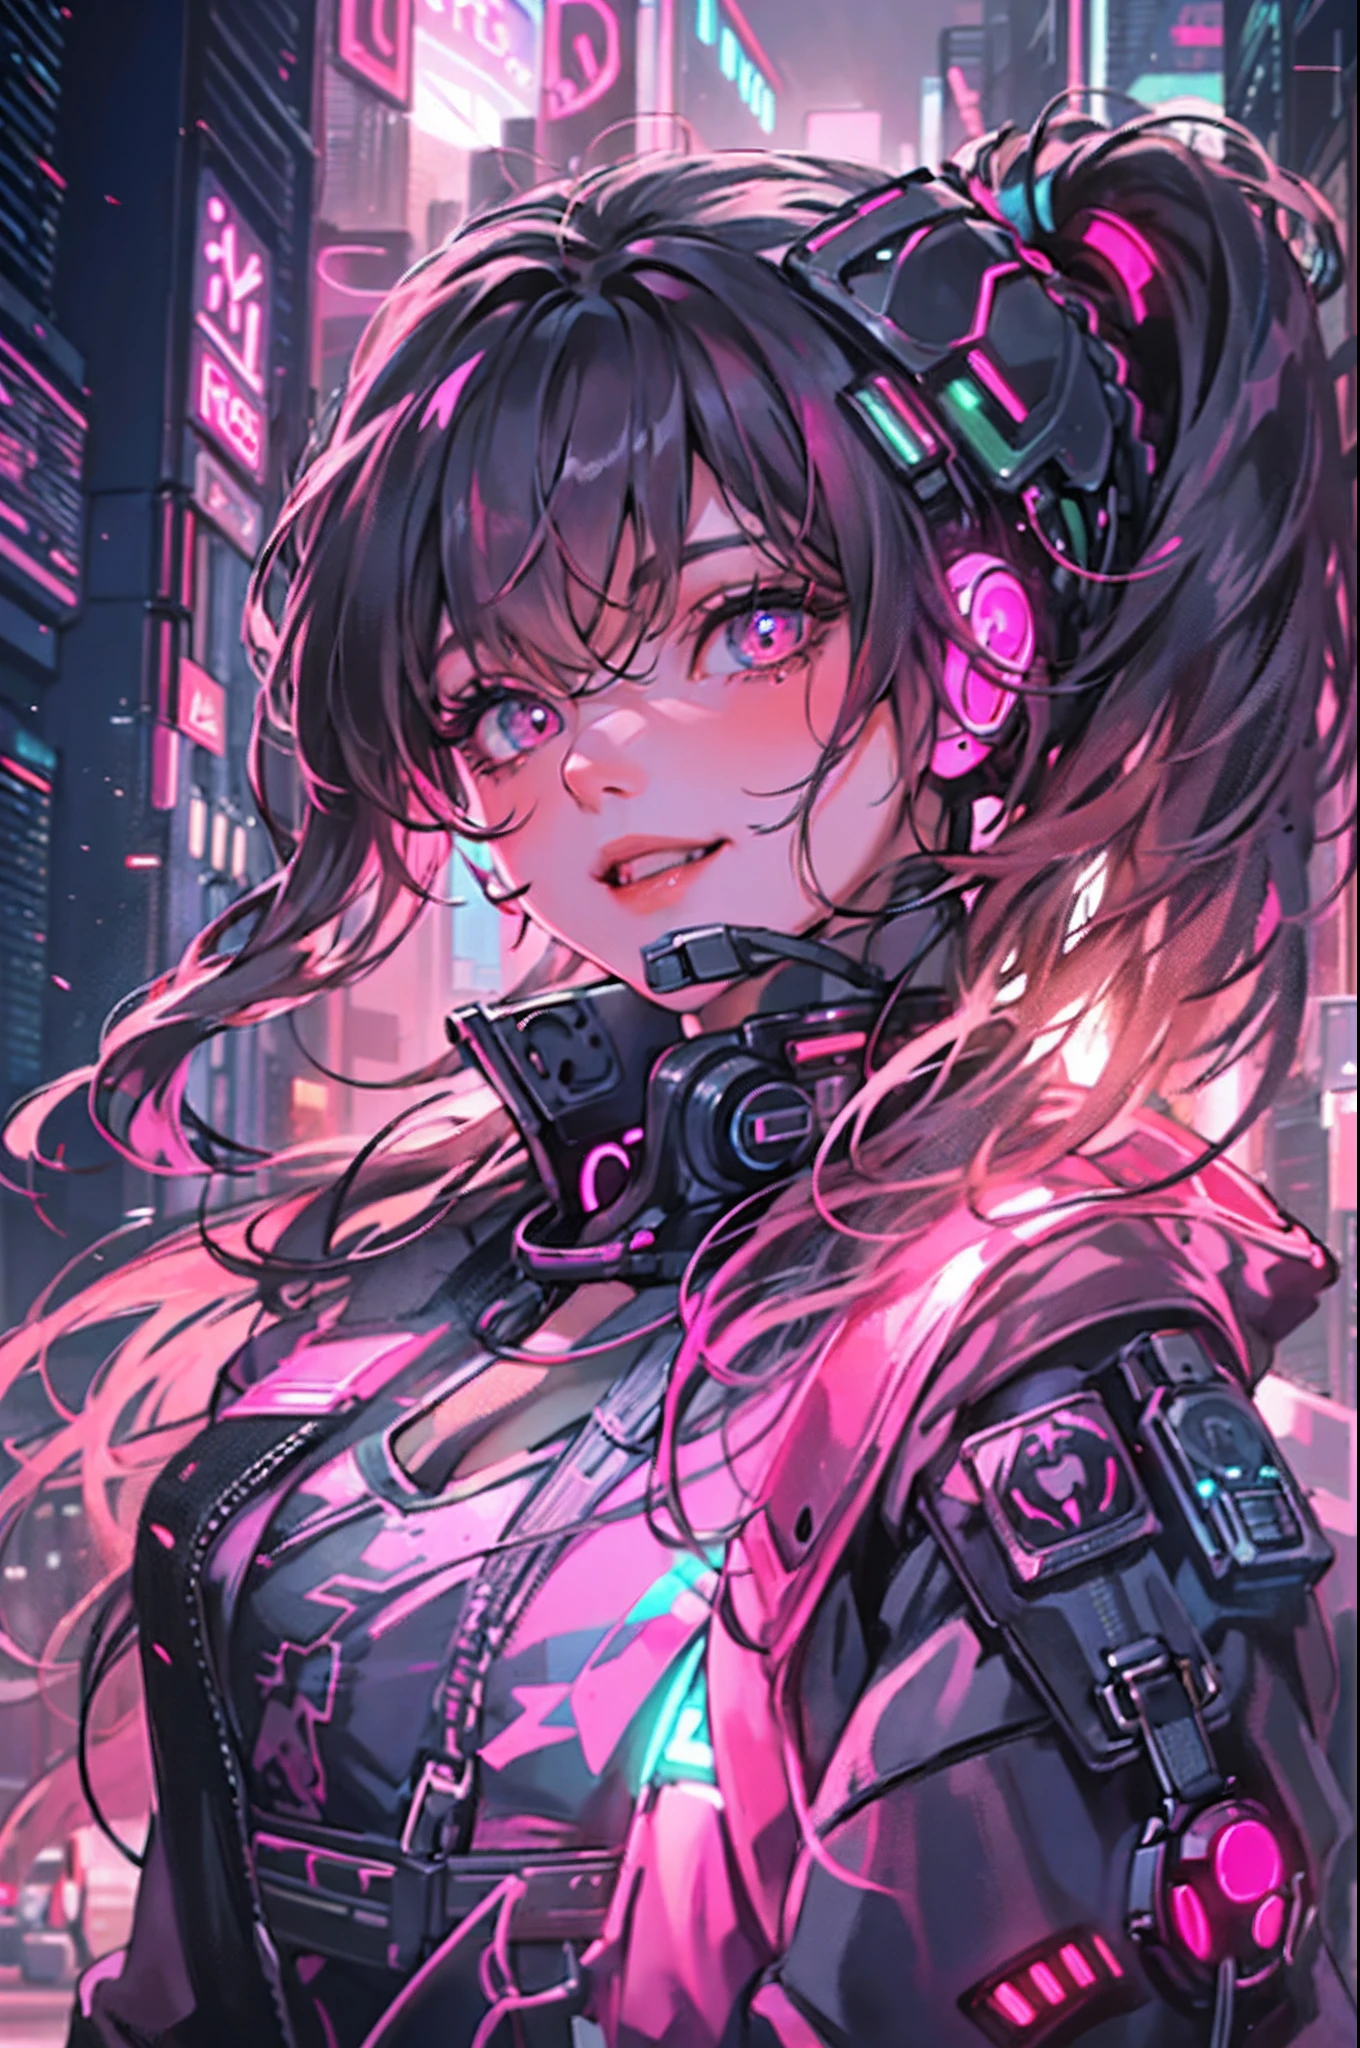 1male people、(A handsome man:1.4)、(A confident smile:1.2)、(30 age old)、(brunette color hair)、(Top image quality)、(8K picture quality)、(cyber punk perssonage)、(masutepiece)、(Wear a military uniform with a shiny cyberpunk hood)、(A confident smile:1.2)、(Full body photo)、(Excessive glowing flowers flying:1.5)、cinematric light, Cinema Shadow, Sharp Images, Extremely detailed, volumetr, bright sprite, particle effect, beautiful effects, Vivid colors, neonlight, (pink neon lights:1.5), Highly detailed image textures, detailed hairs, Detailed face, Detailed eyes, Full body photo, City、Dark hair、A shimmering red halo、Photo from the knee up、beautiful effects, Vivid colors, Highly detailed image textures, detailed hairs, Detailed eyes,(cyberpunk city landscape:1.5)、